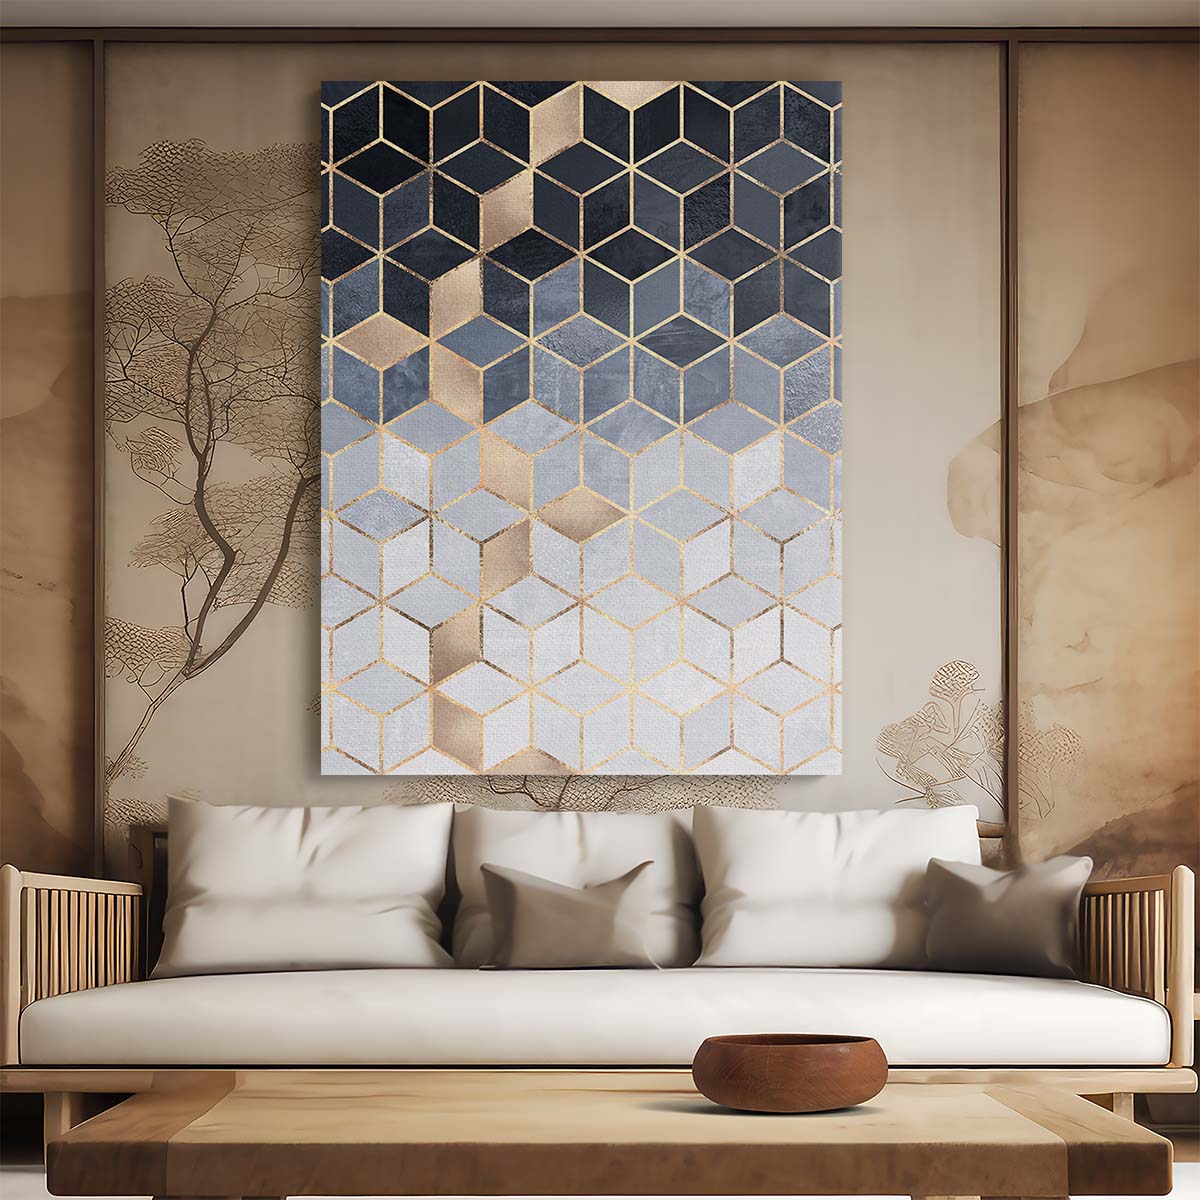 Golden Cubes Abstract Geometry Illustration Wall Art by Luxuriance Designs, made in USA